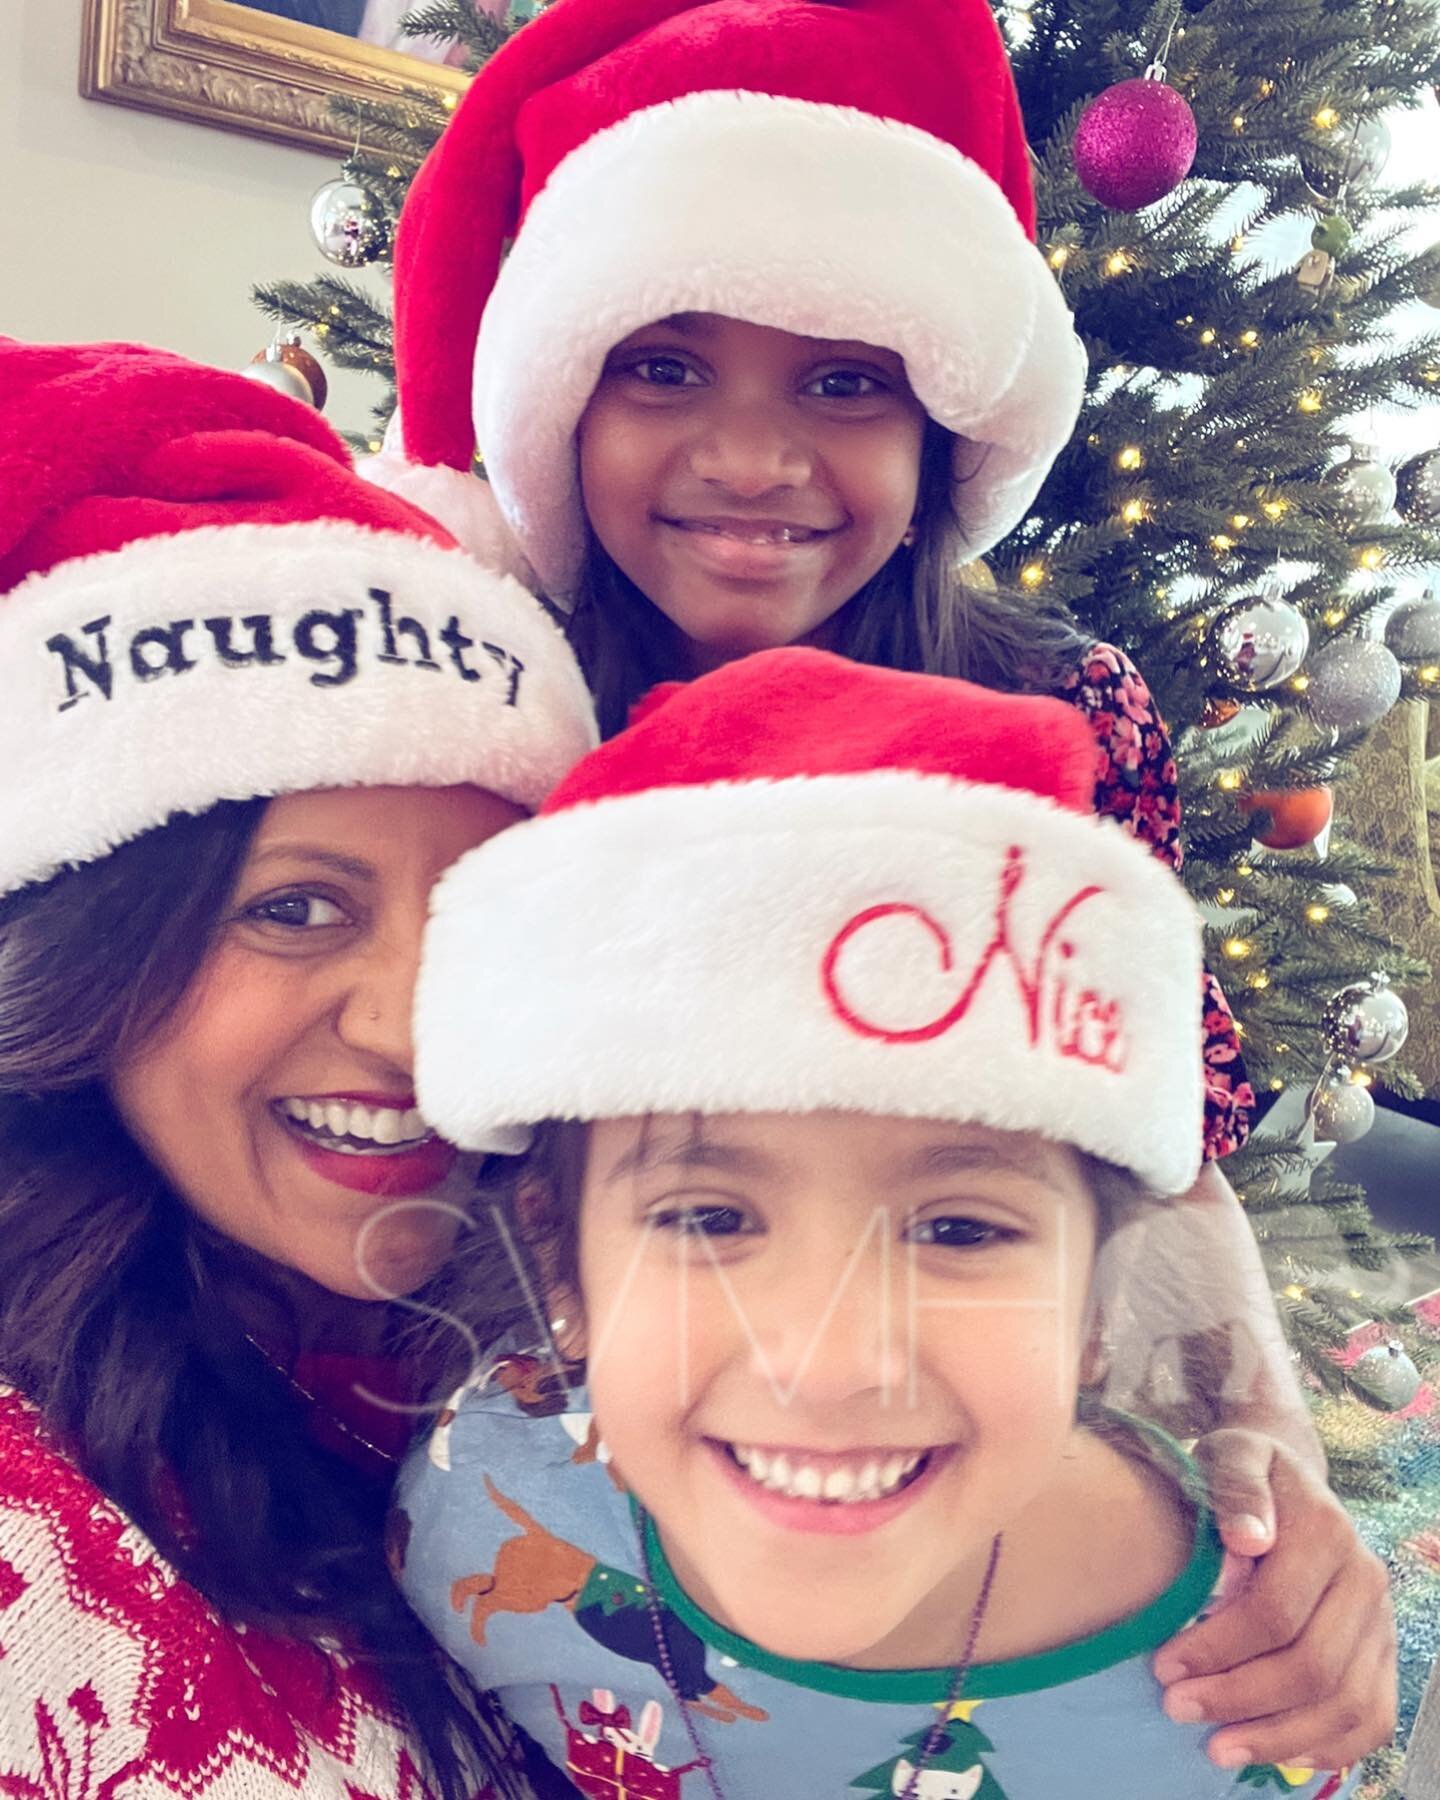 It&rsquo;s the most wonderful time of the year!🎄 We got into the spirit a little early over Thanksgiving, but in my book it&rsquo;s actually never too early! ☺️ Thx to my sis @ranjani_durham for hosting and for all the festive hats.🎅🏾 Happy Decemb